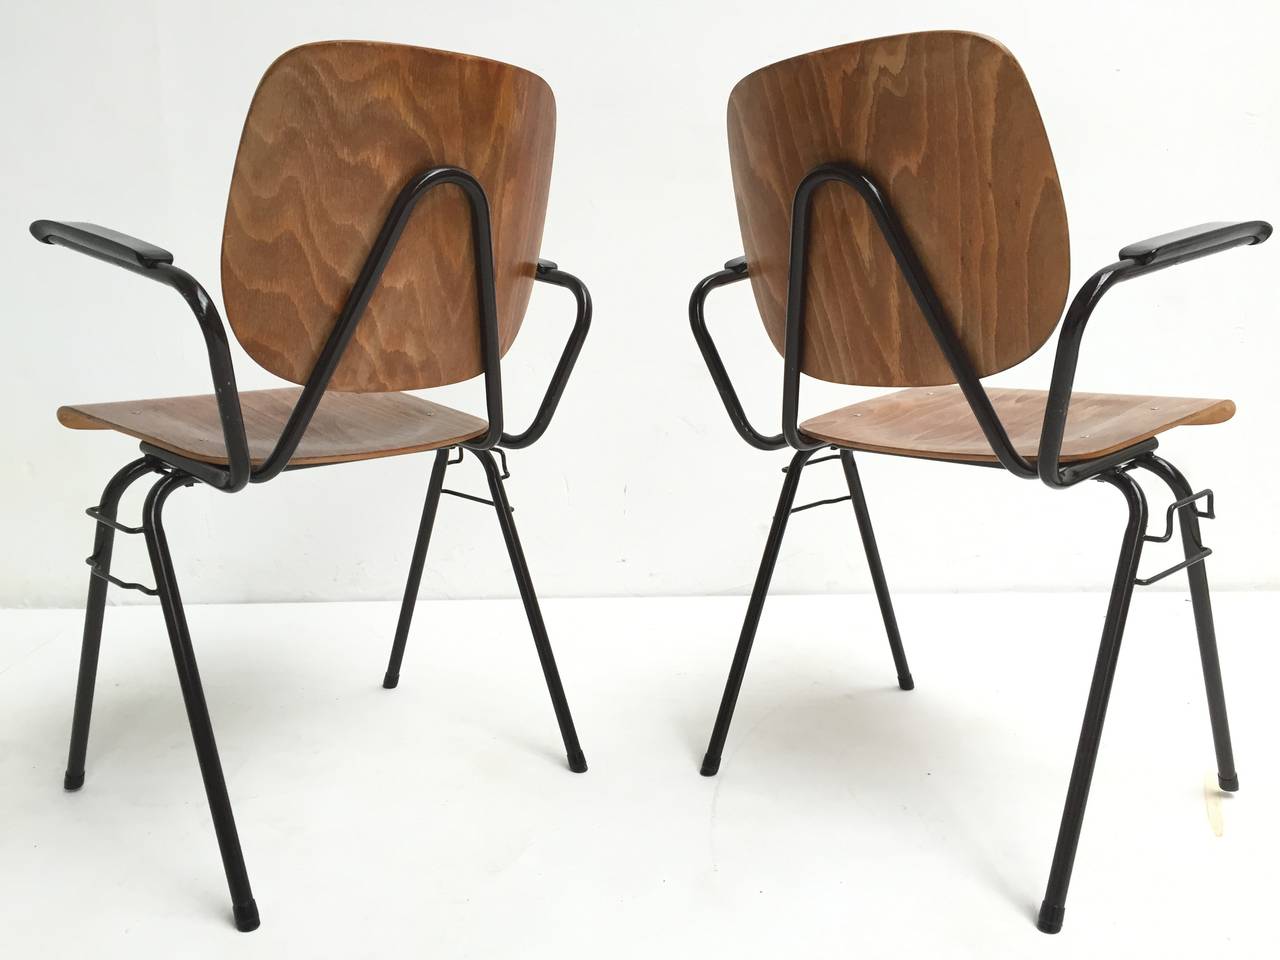 These armchair Model 305 where designed in 1957 by important Dutch pioneer designer Kho Liang Ie for CAR industry Katwijk The Netherlands

This version was purchased in 1963 and has also the link option to make rows of chairs connected in for